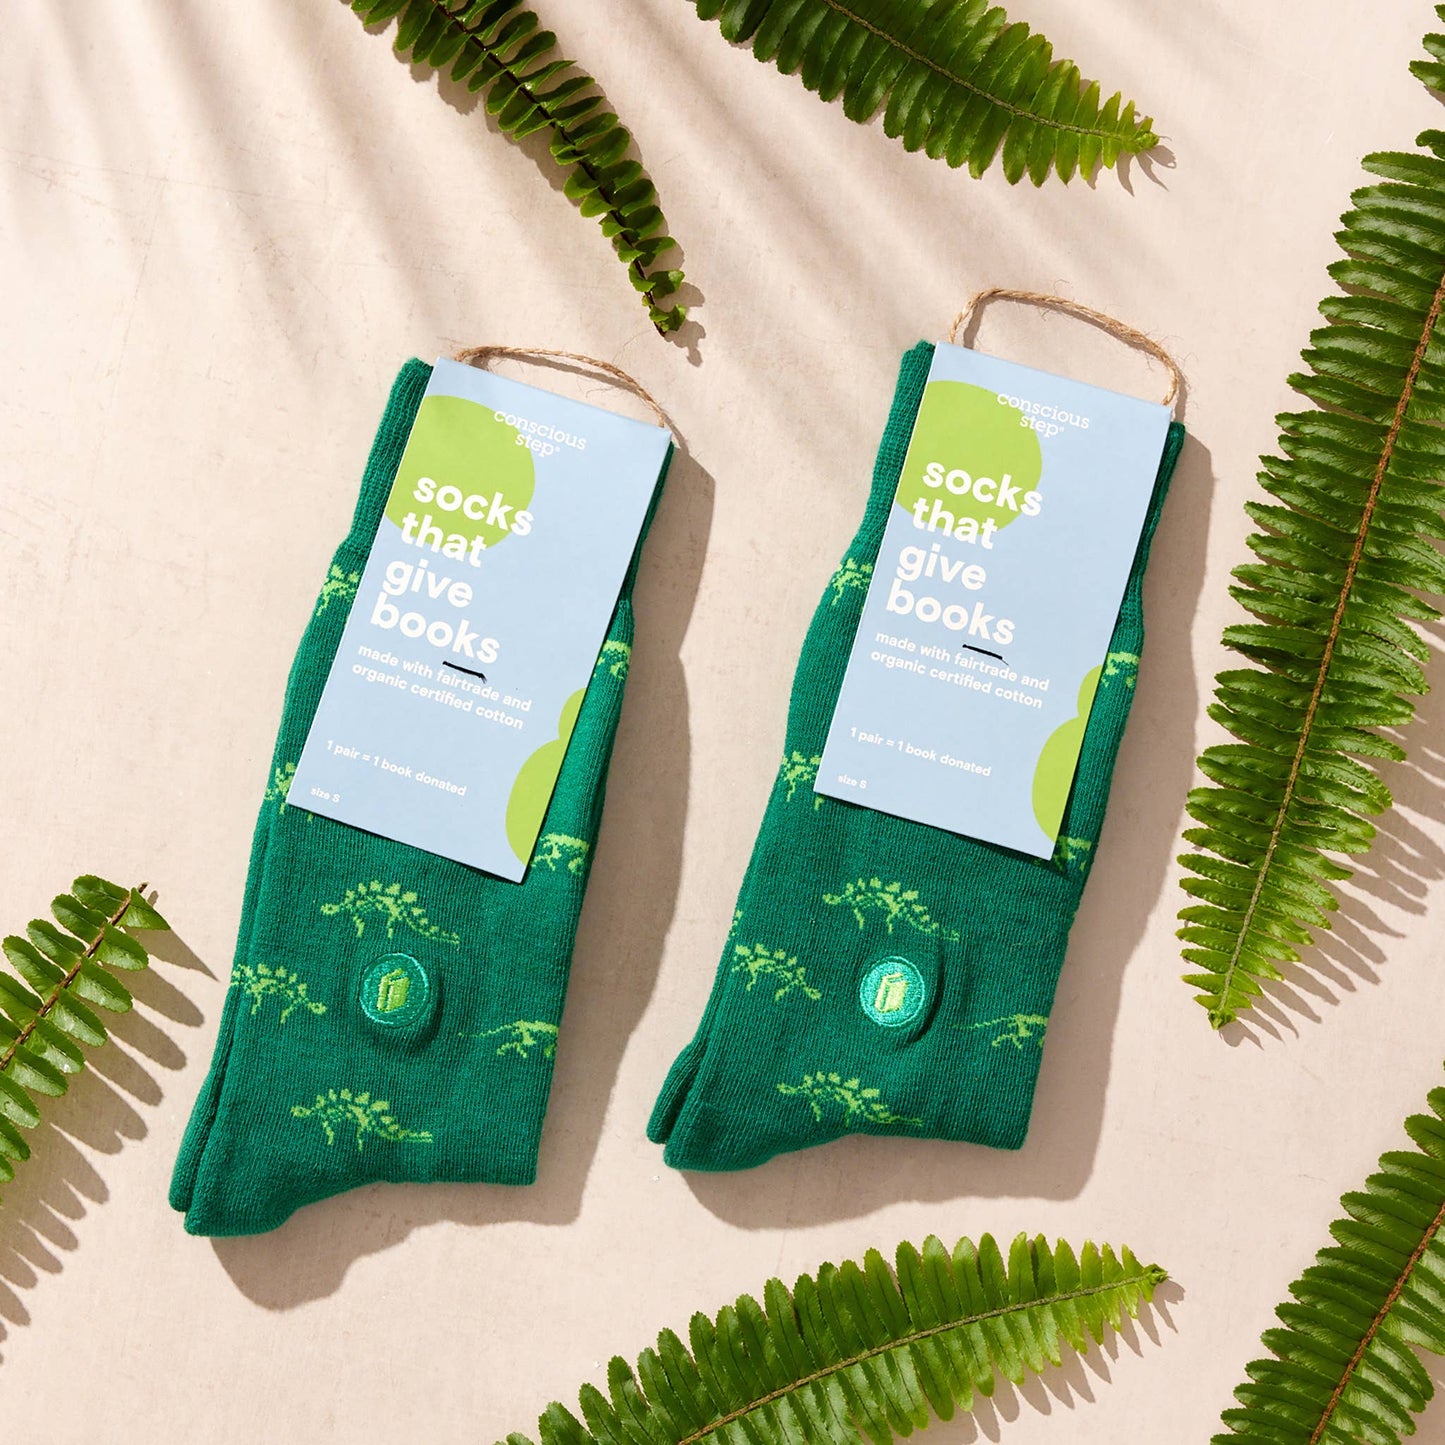 Conscious Step - Socks that Give Books  (Green Dinosaurs)  Conscious Step   -better made easy-eco-friendly-sustainable-gifting